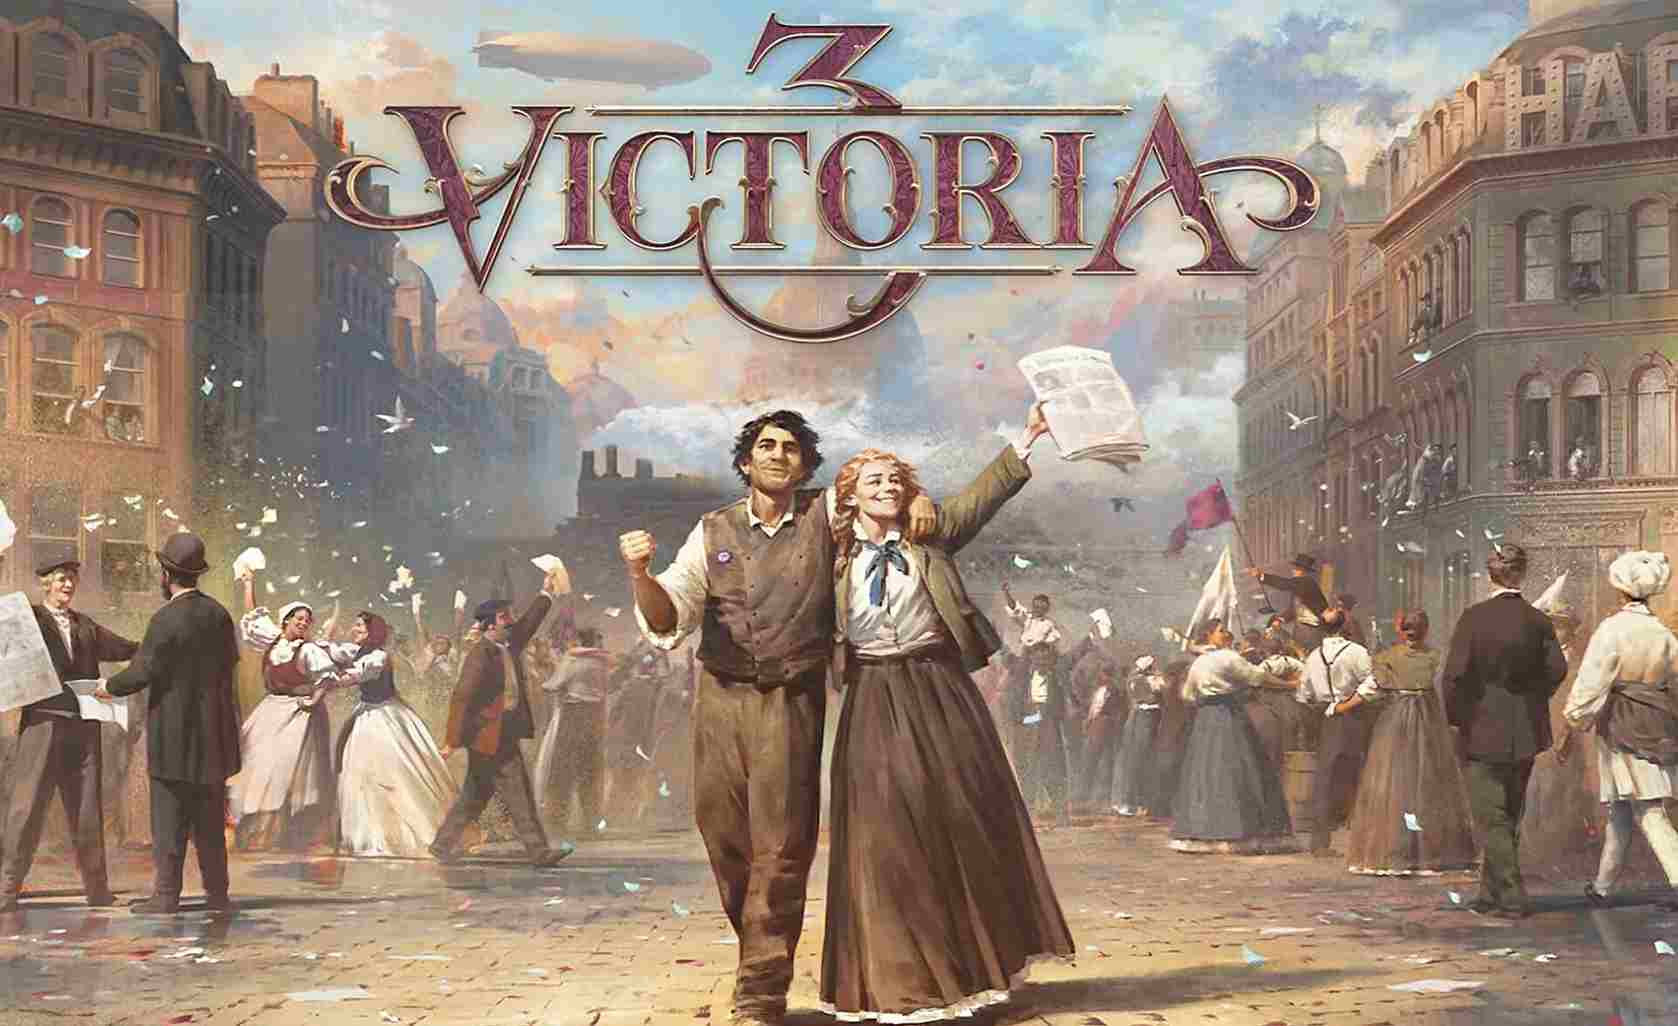 Victoria 3 Game Soundtrack AKA Songs List: Listen Online From Here